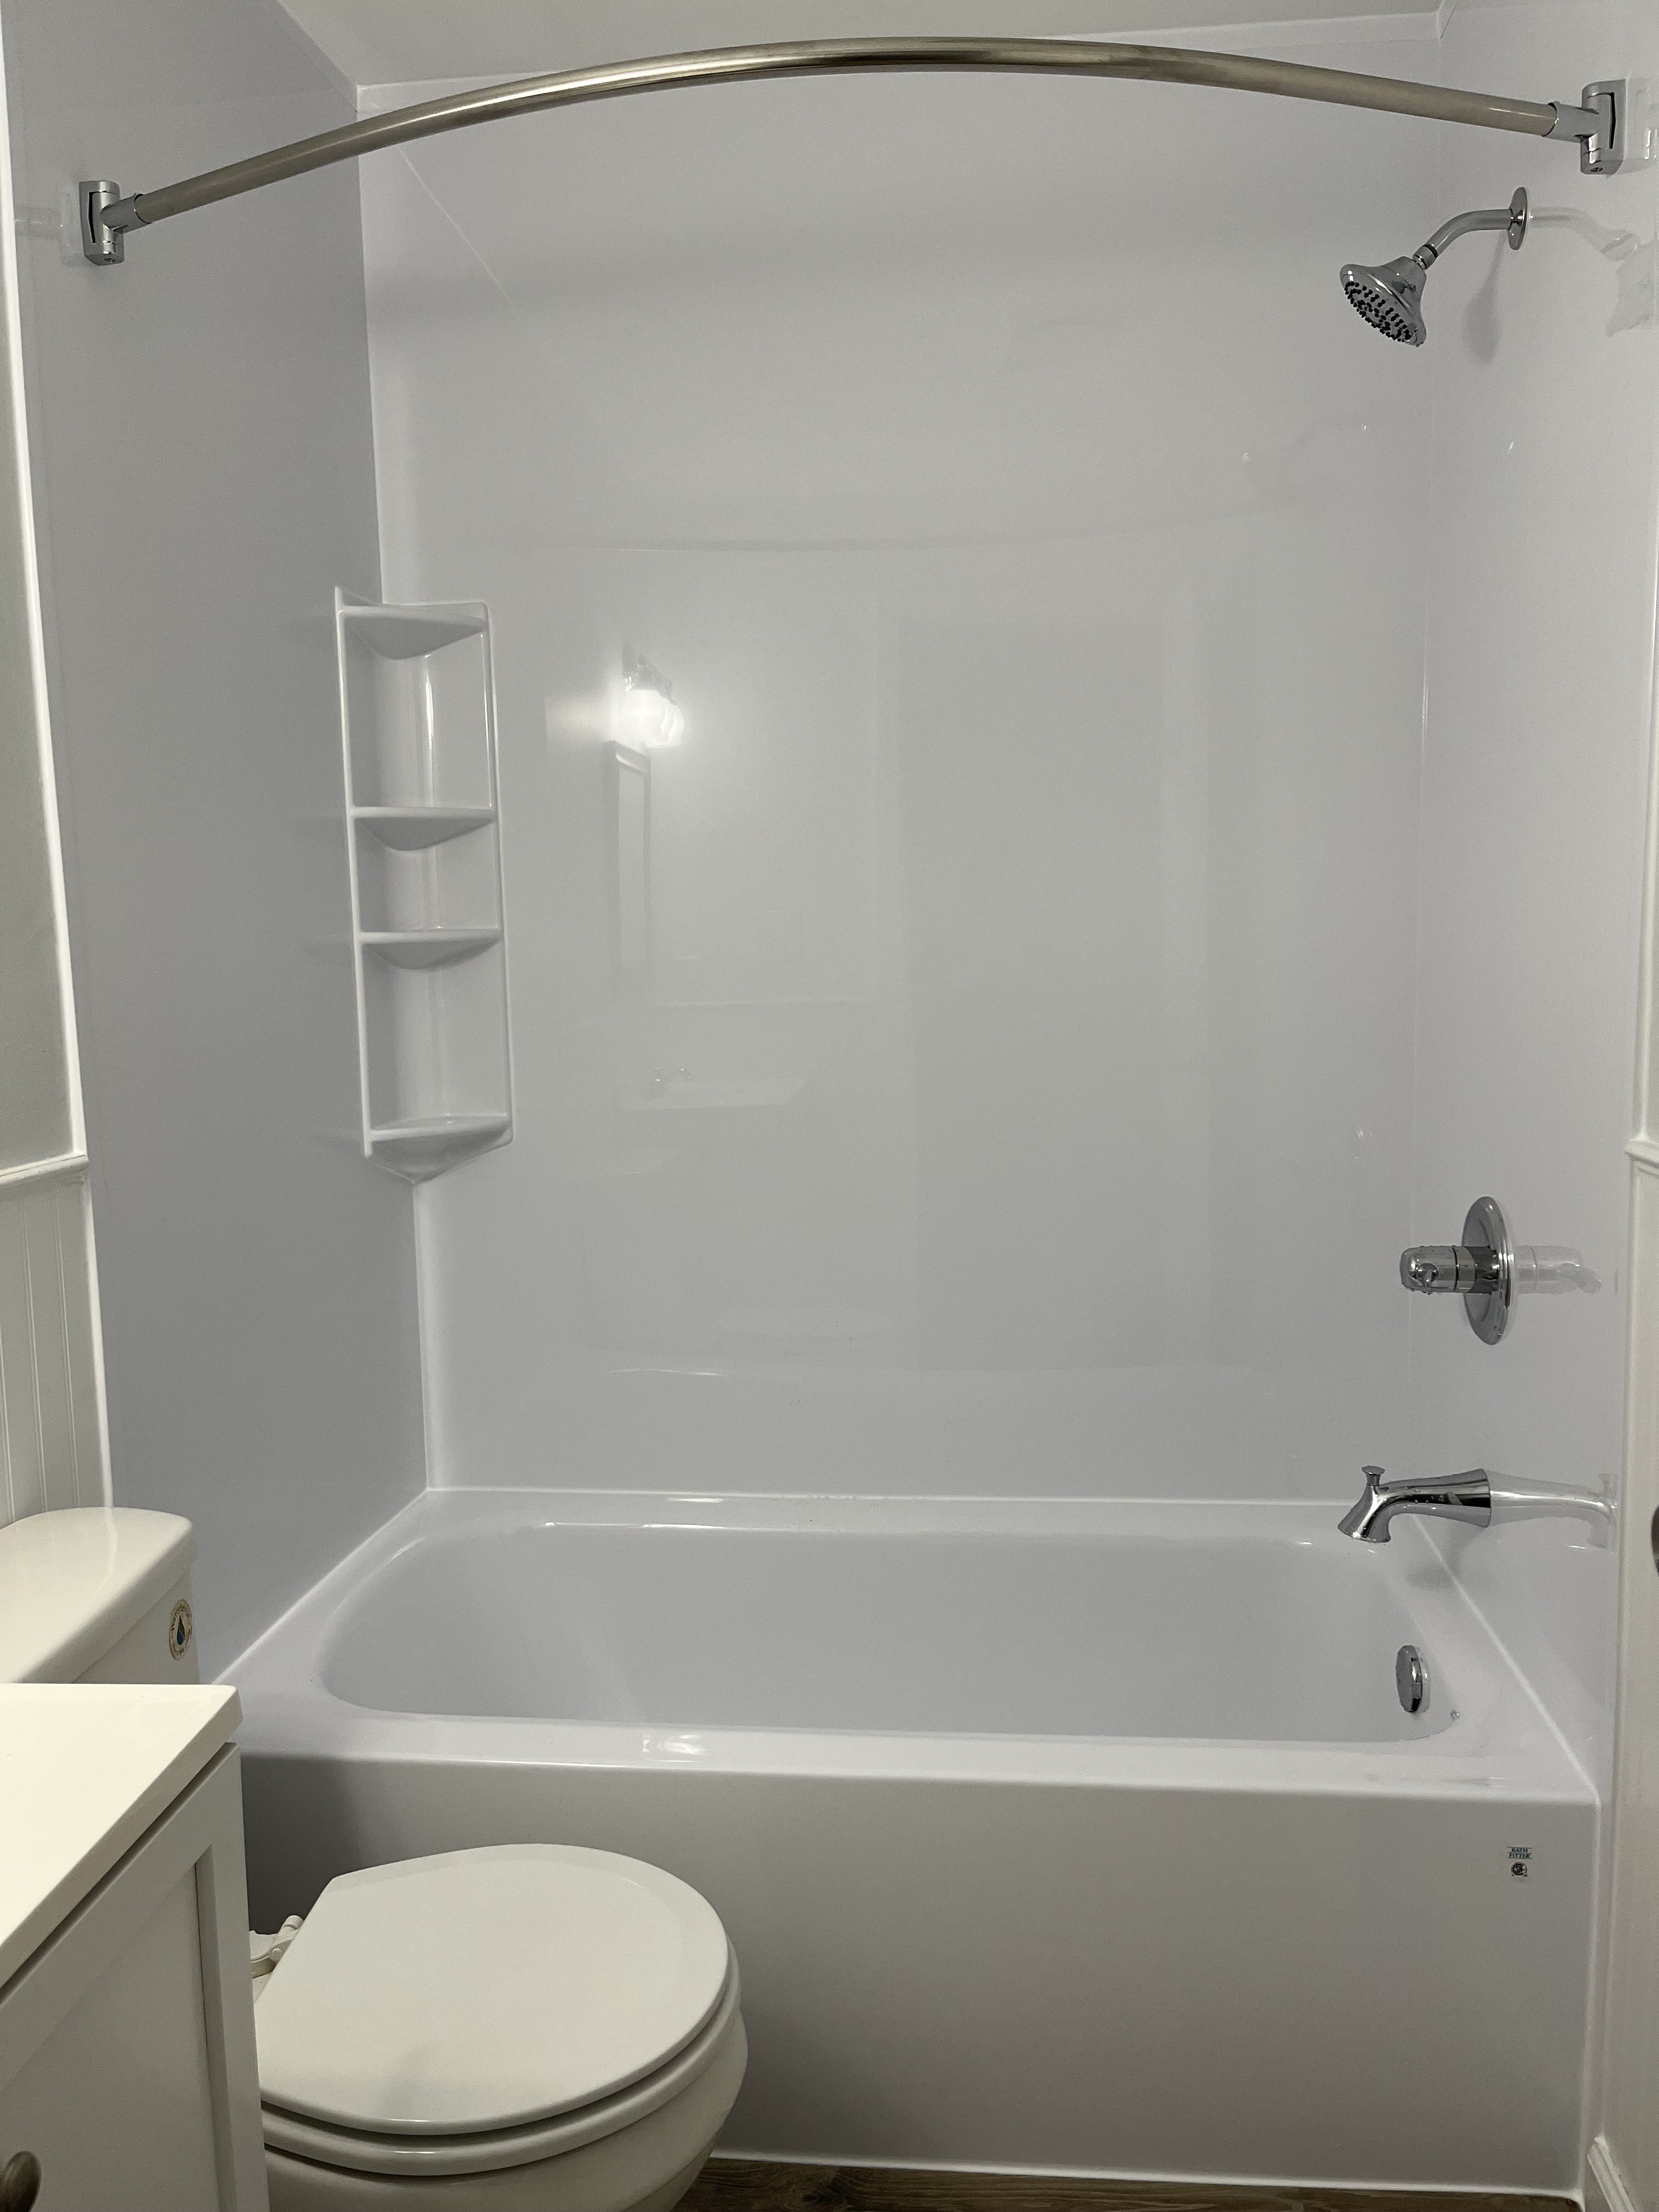 https://comehomeforcomfort.files.wordpress.com/2022/06/bath-fitter-review-pros-and-cons-3.jpg